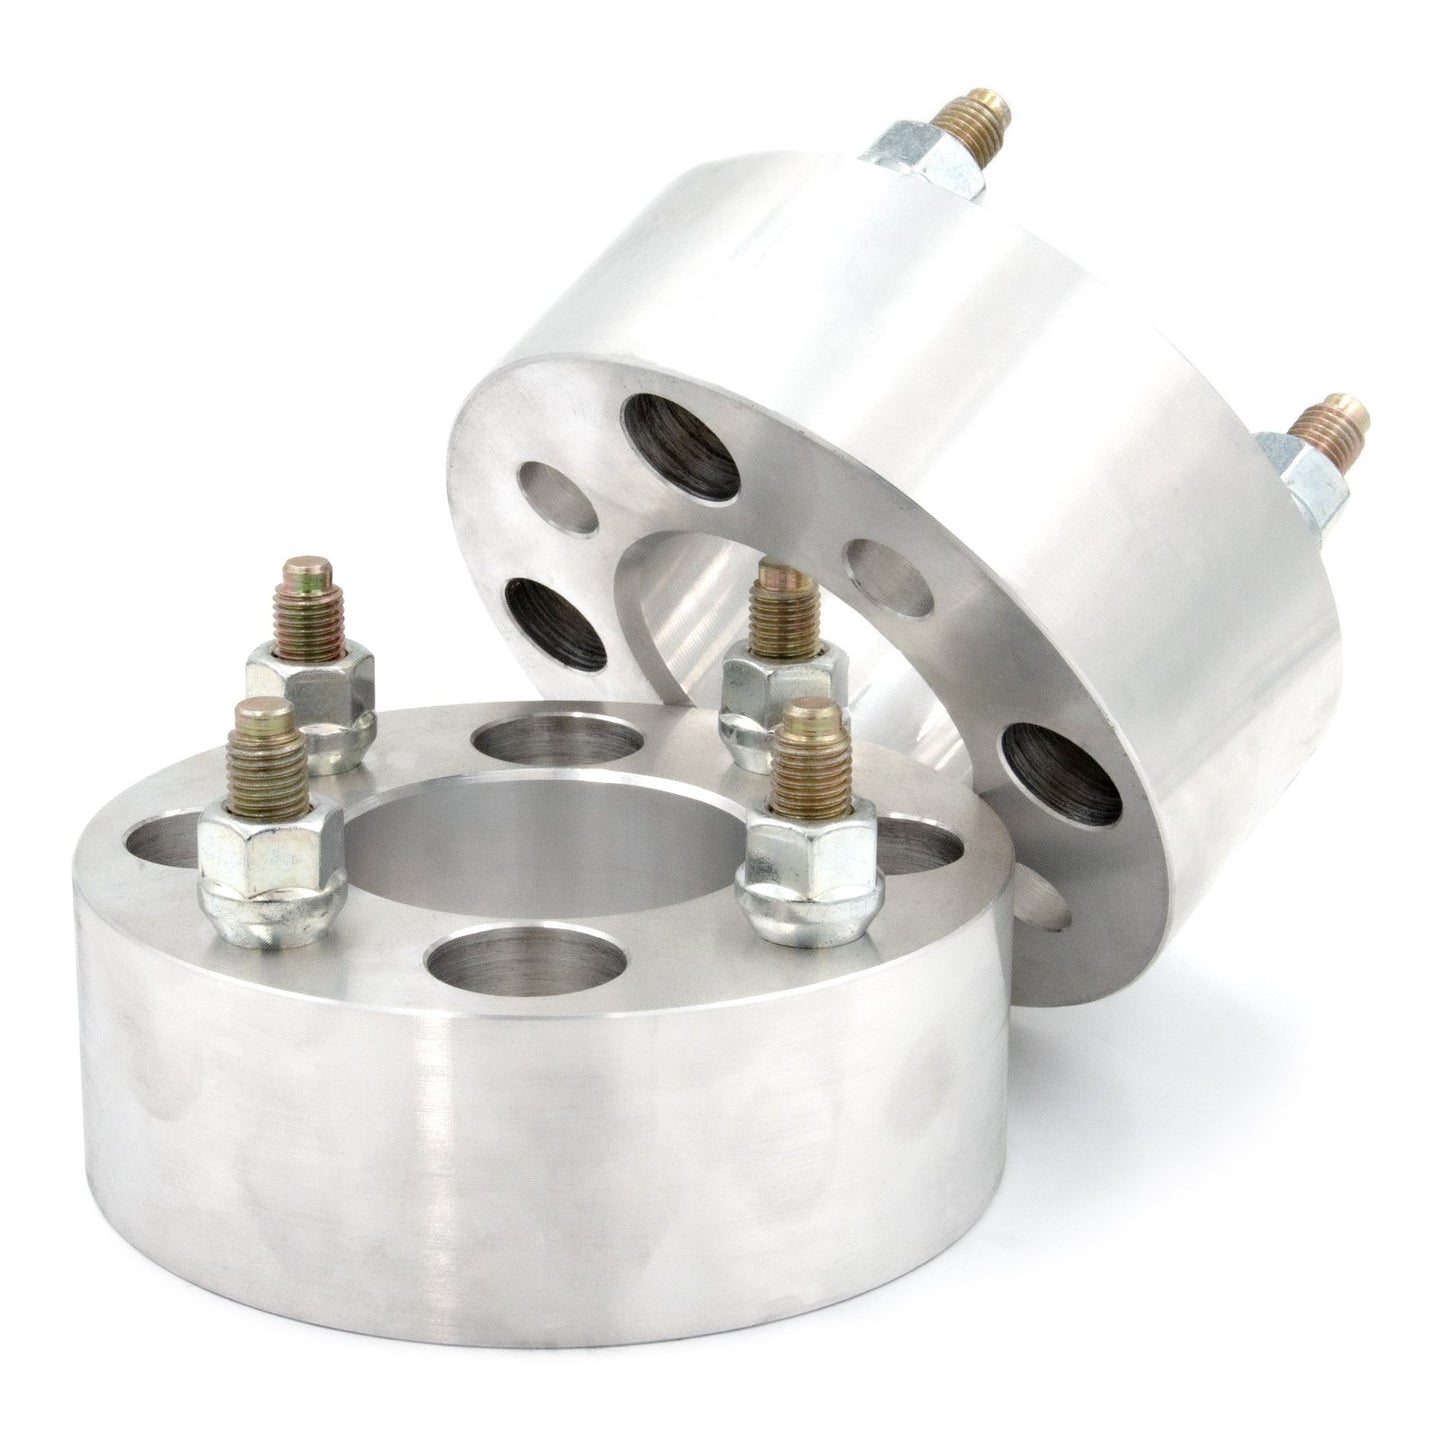 4x130 to 4x130 Wheel Spacer/Adapter - Thickness: 3/4"- 4"